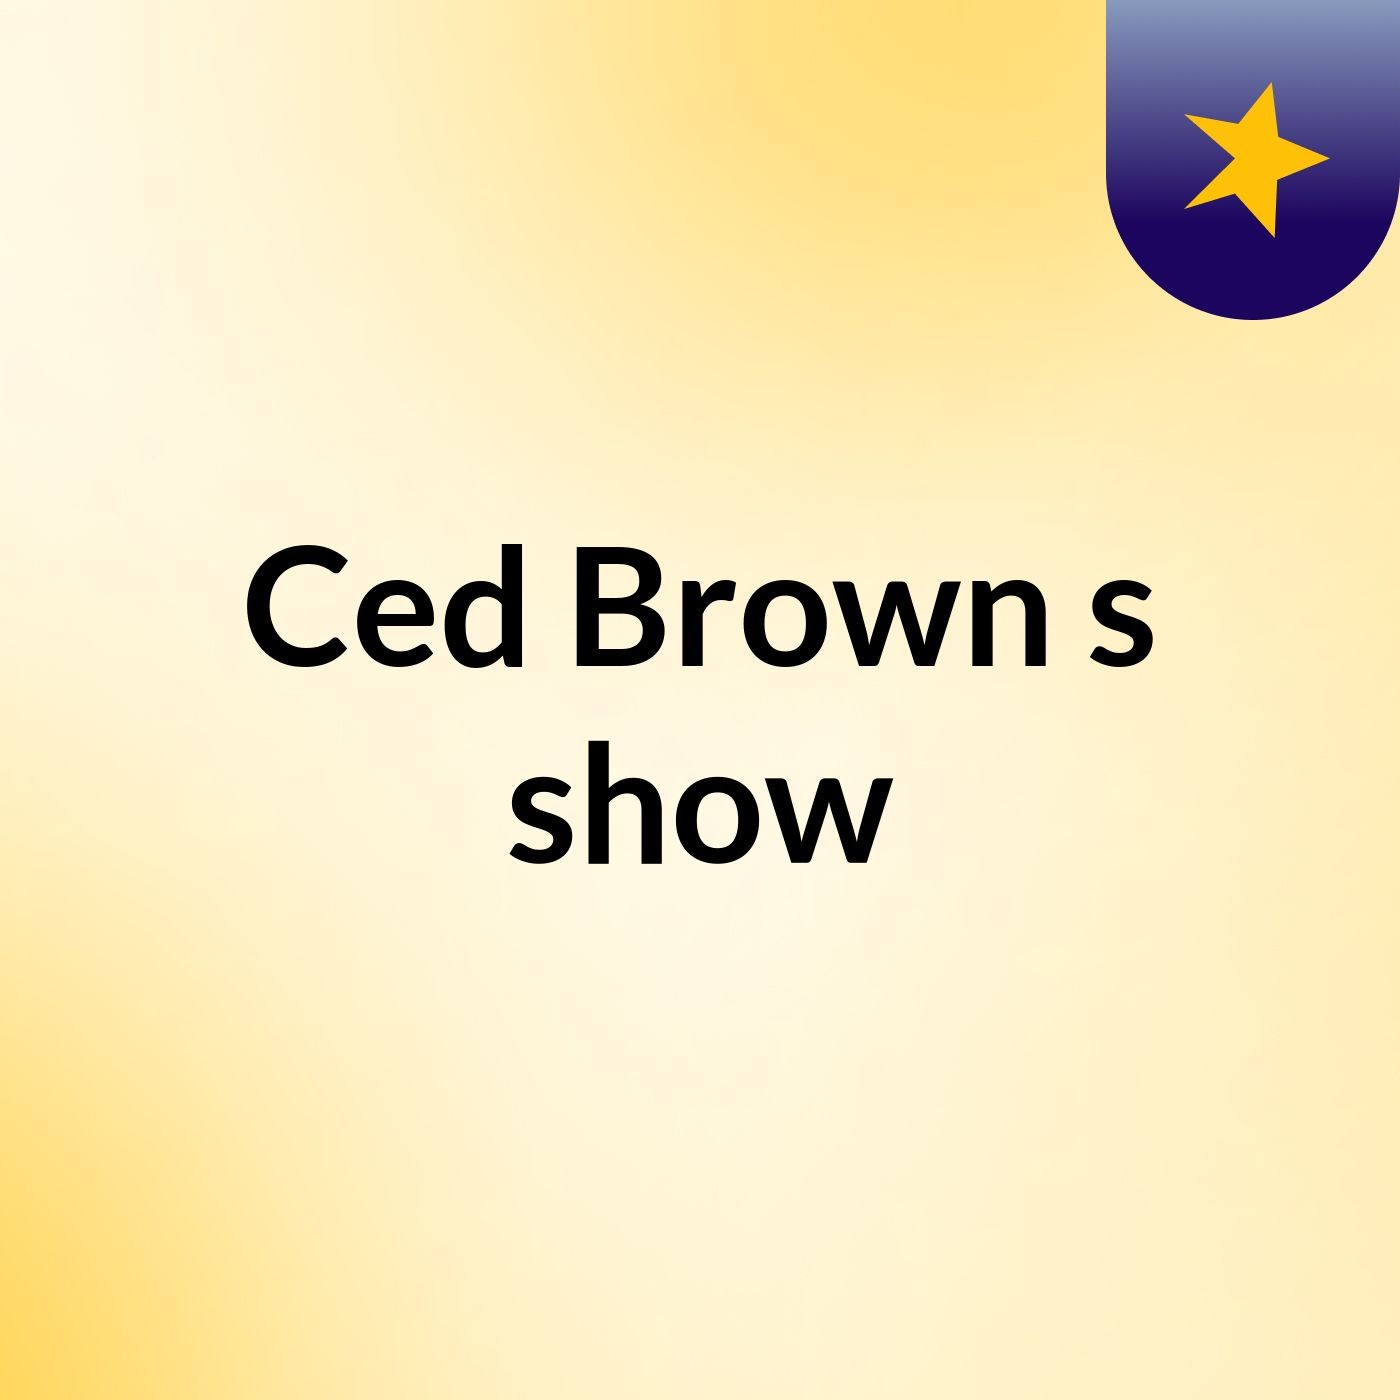 Ced Brown's show